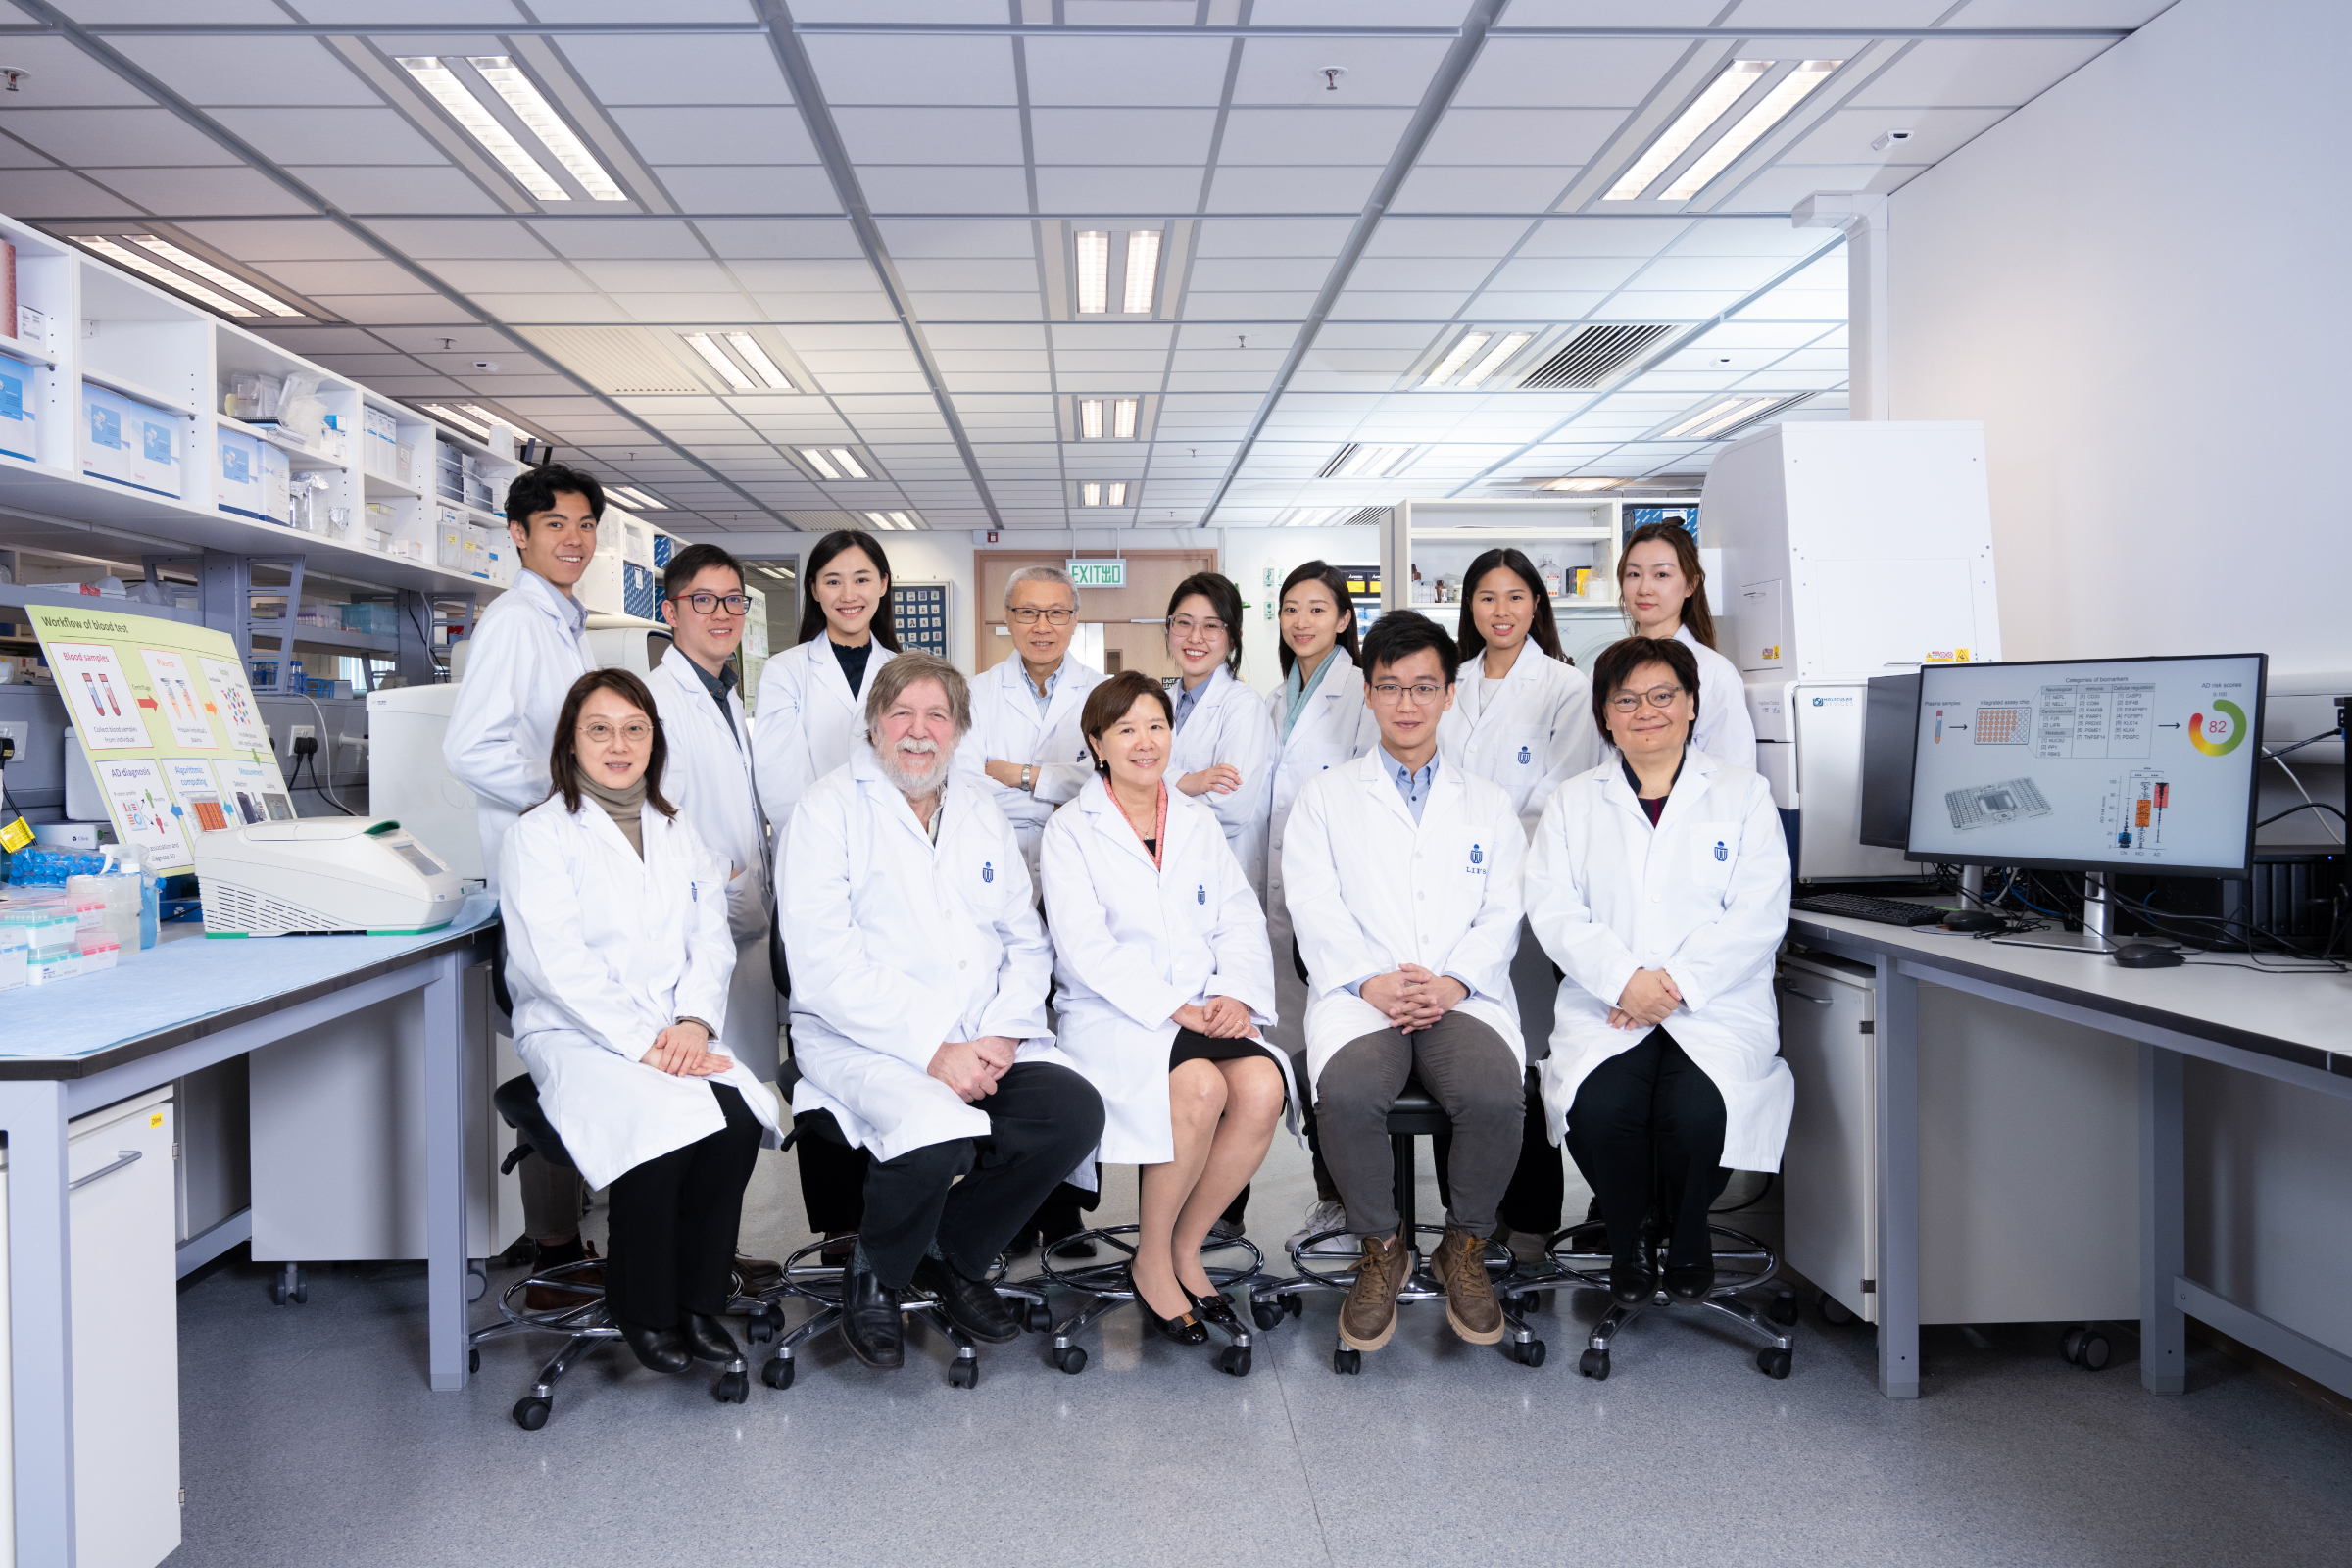 The photo of the research team, including HKUST President Prof. Nancy IP (center, front row), UCL Chair of the Molecular Biology of Neurological Disease Prof. John HARDY (second from left, front row), HKUST Division of Life Science Research Professor Prof. Amy FU (first from right, front row), HKCeND Chief Scientific Officer Dr. Fanny IP (first from left, front row), HKCeND Clinical Research Fellow Dr. MOK Kin-Ying (forth from left, back row), and the first author of the research paper Dr. Jason JIANG Yuanbing (second from right, front row) with other research team members.